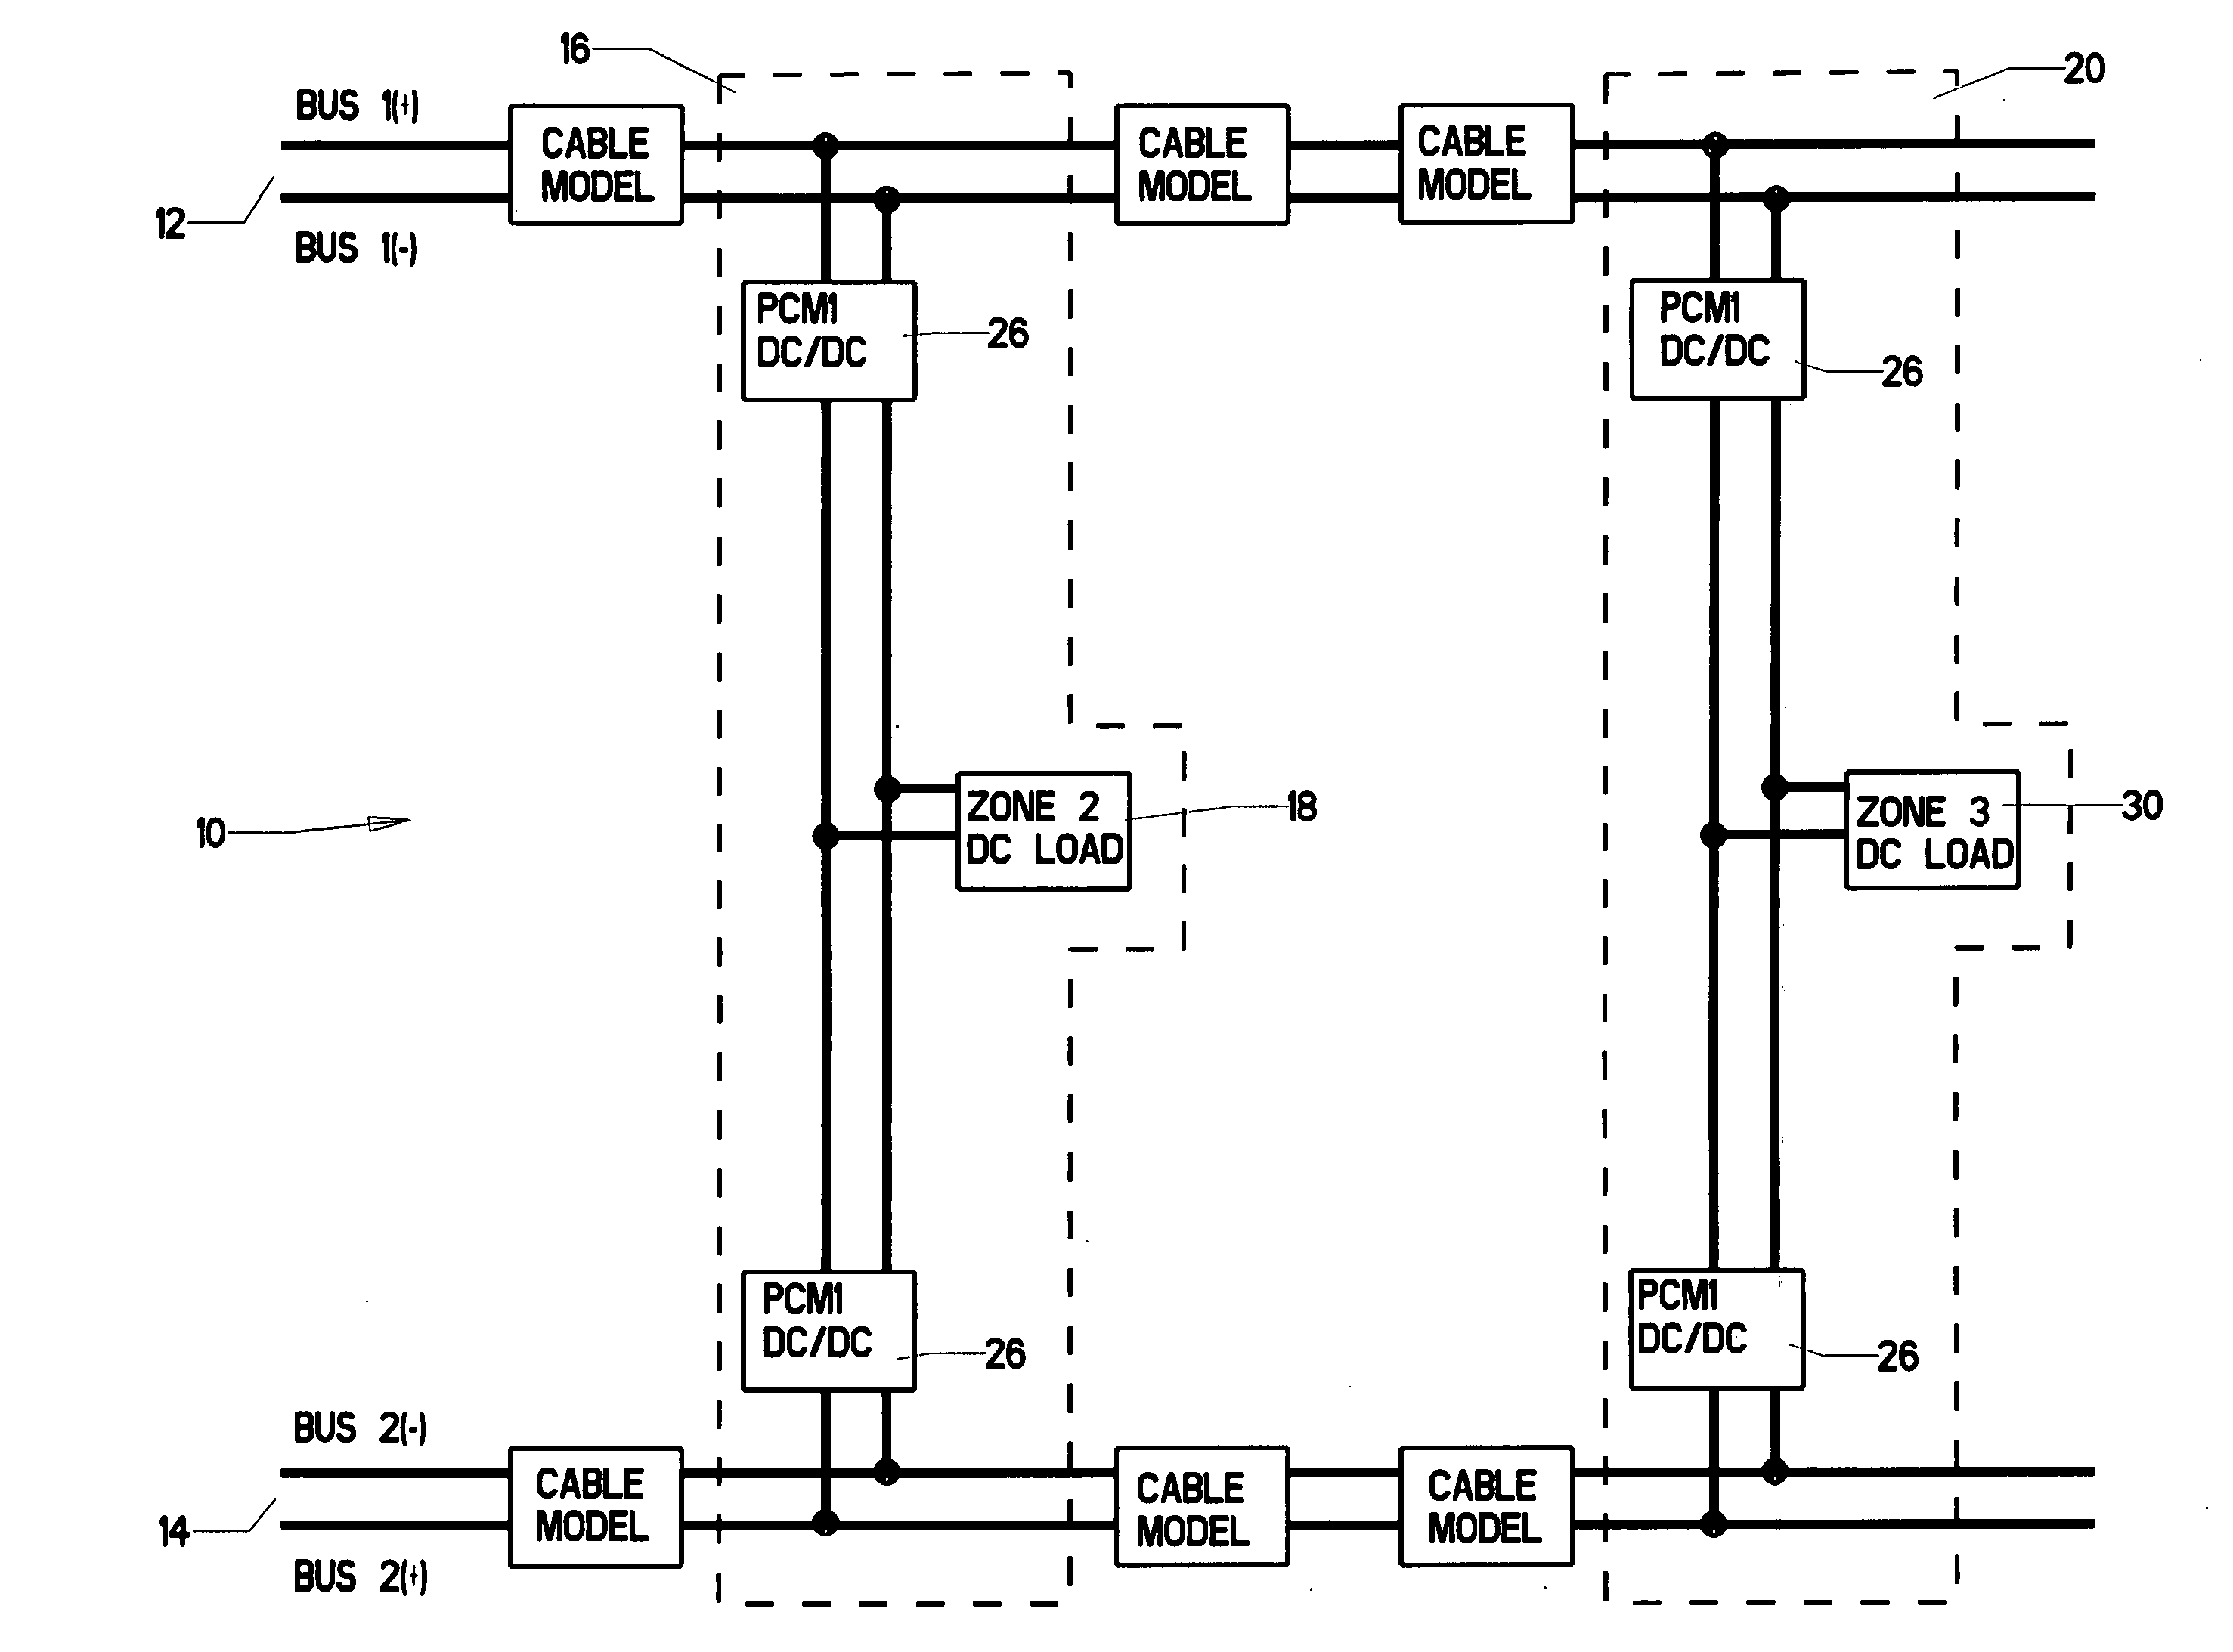 Method for locating phase to ground faults in DC distribution systems